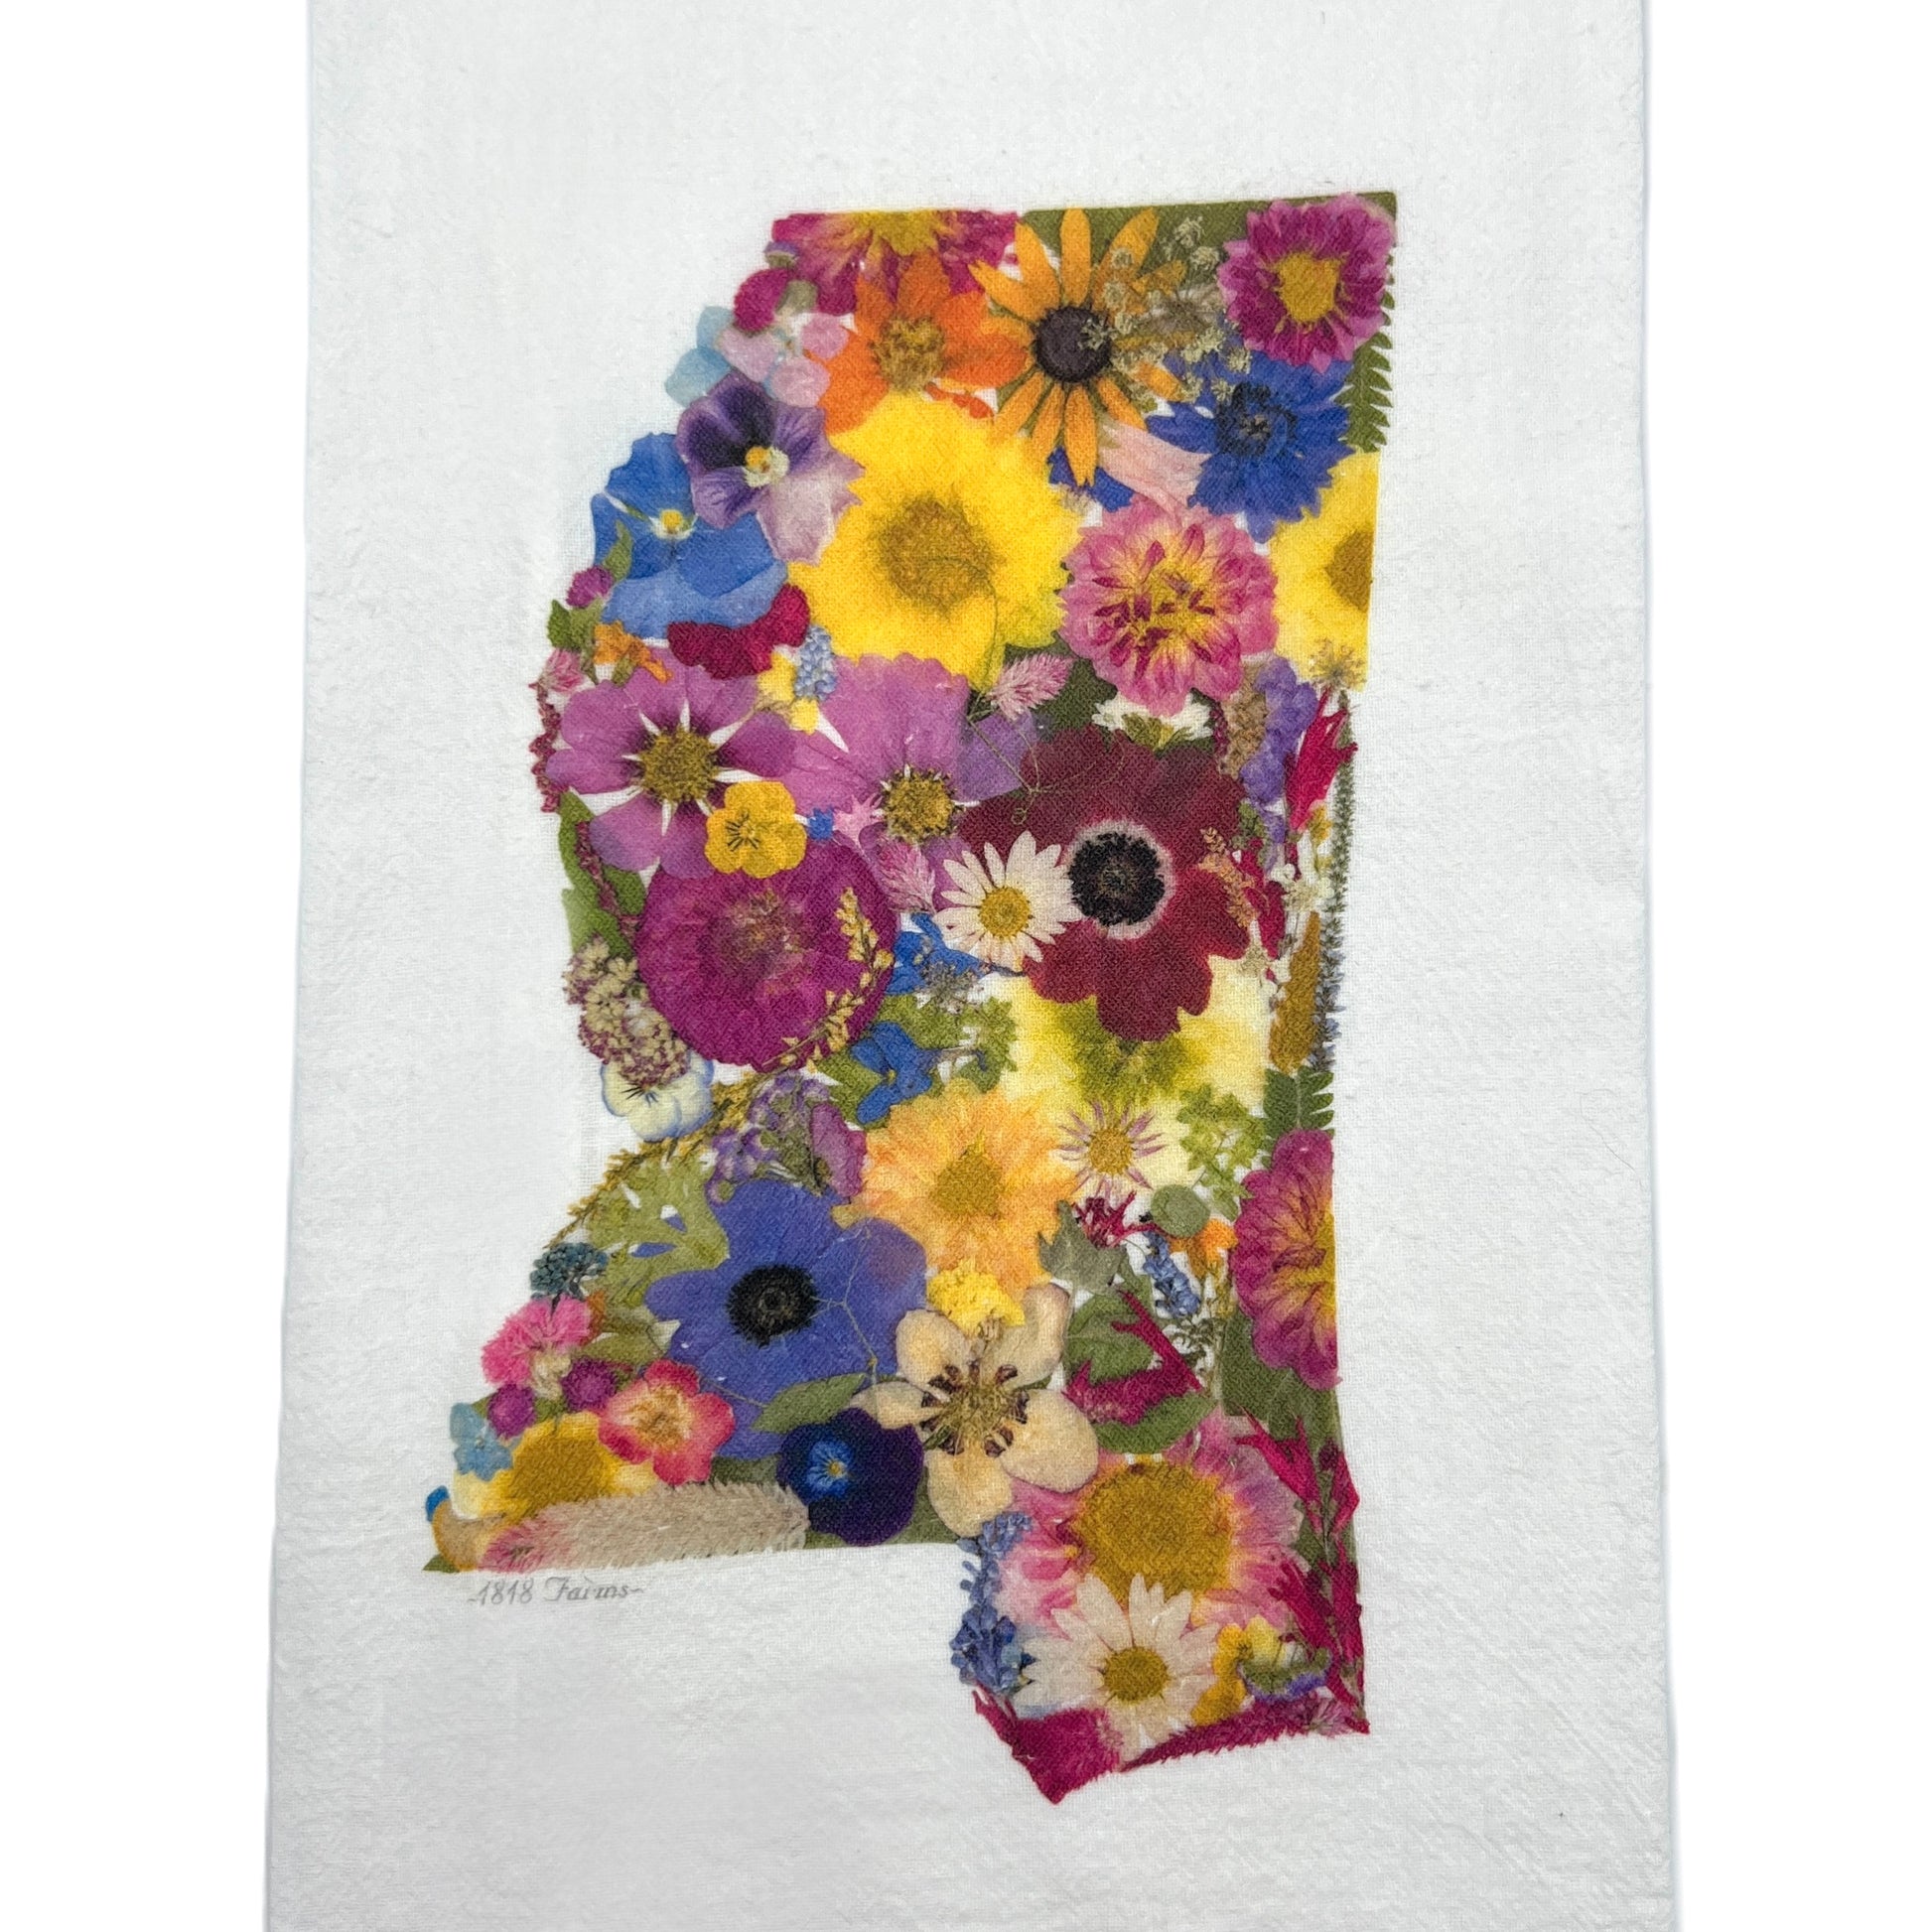 Mississippi Themed Flour Sack Towel Featuring Dried, Pressed Flowers - "Where I Bloom" Collection Towel 1818 Farms   